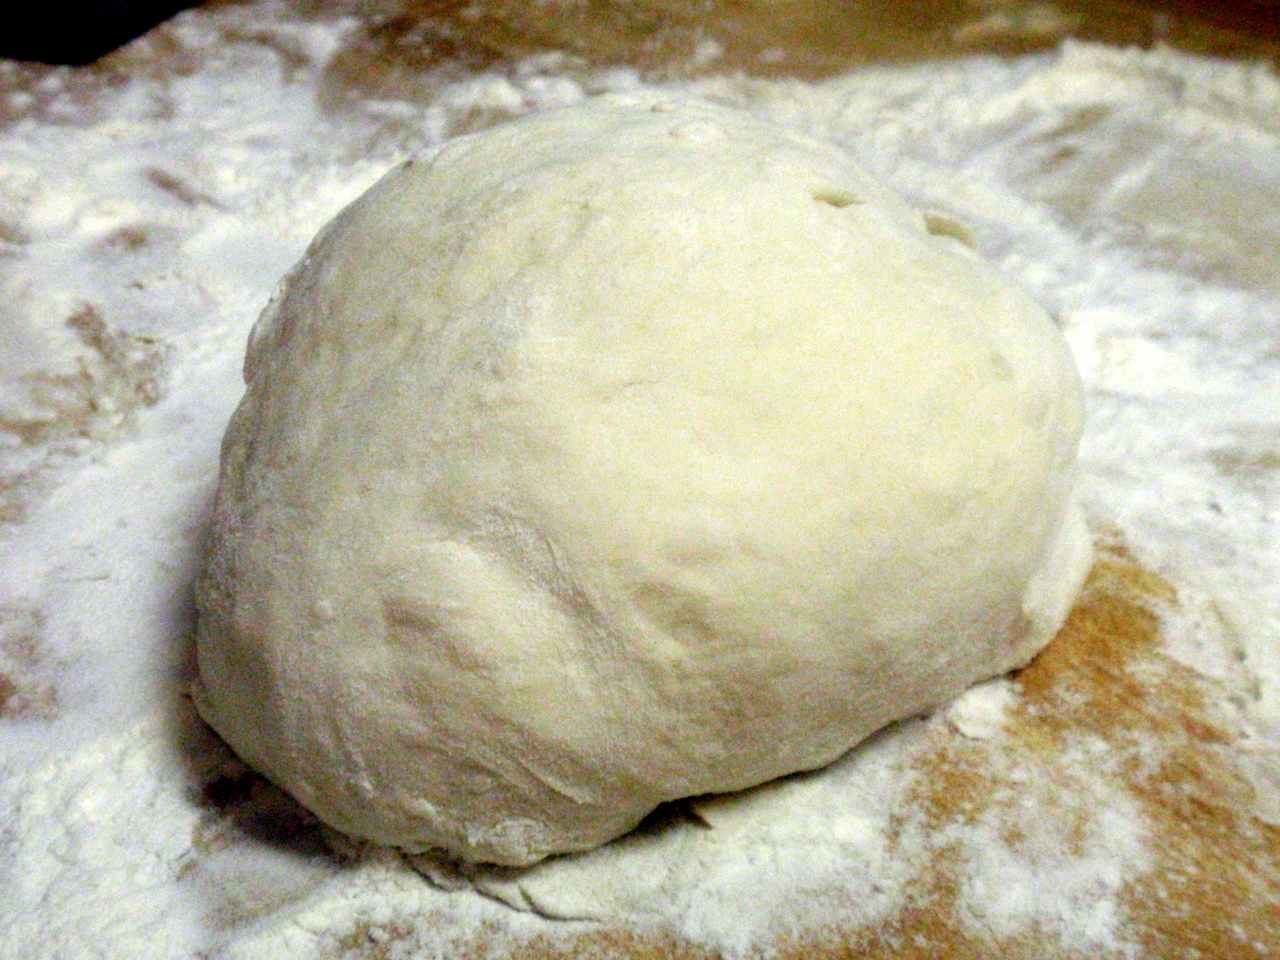 I forgot to add the salt to the dough though!